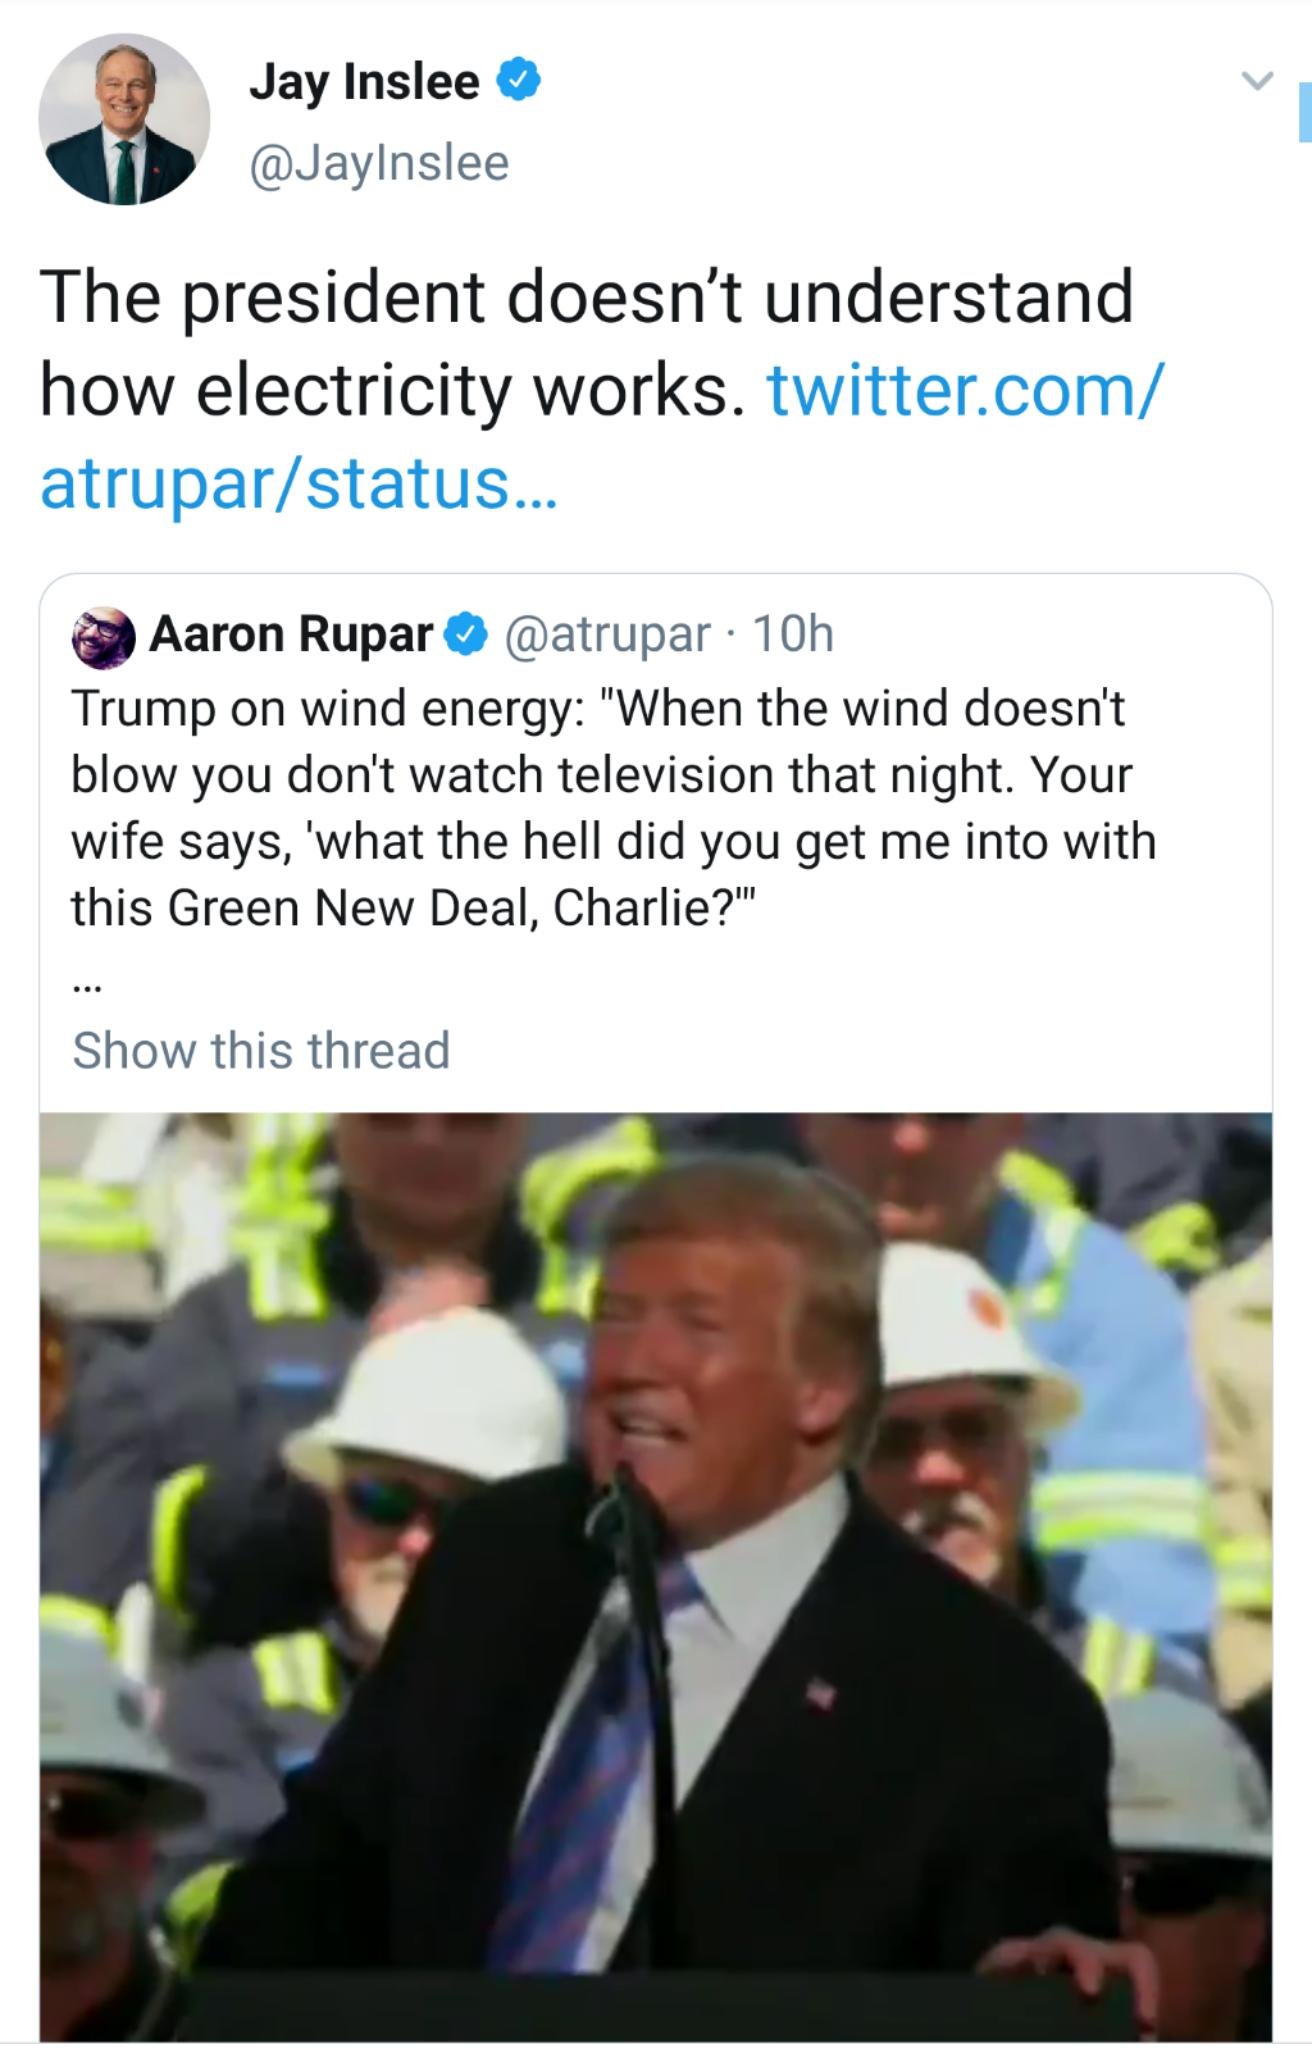 presentation - Jay Inslee The president doesn't understand how electricity works. twitter.com atruparstatus... Aaron Rupar 10h Trump on wind energy "When the wind doesn't blow you don't watch television that night. Your wife says, 'what the hell did you g